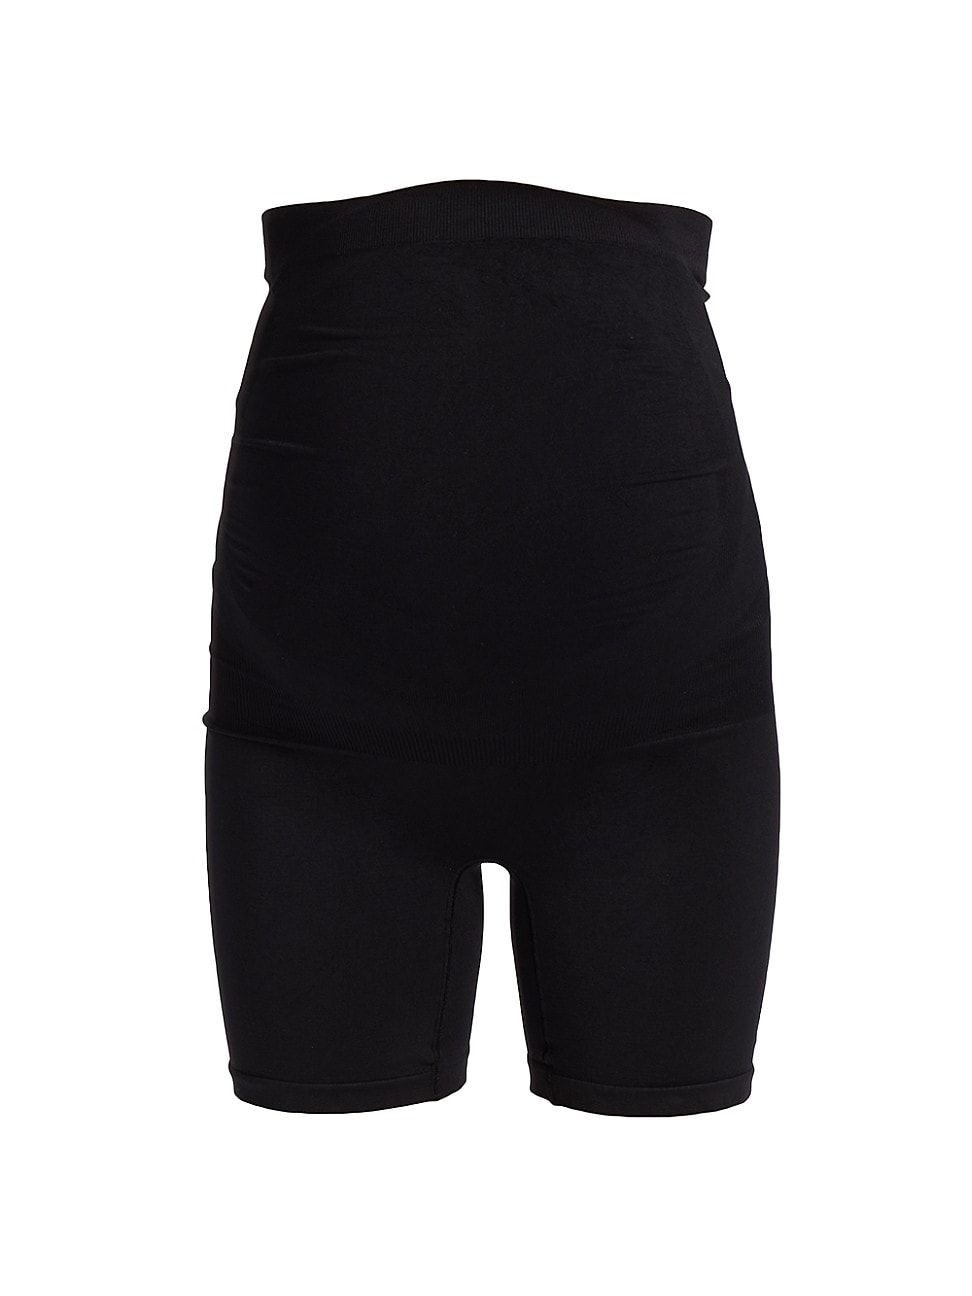 Blanqi Everyday Maternity Support Shorts | Saks Fifth Avenue